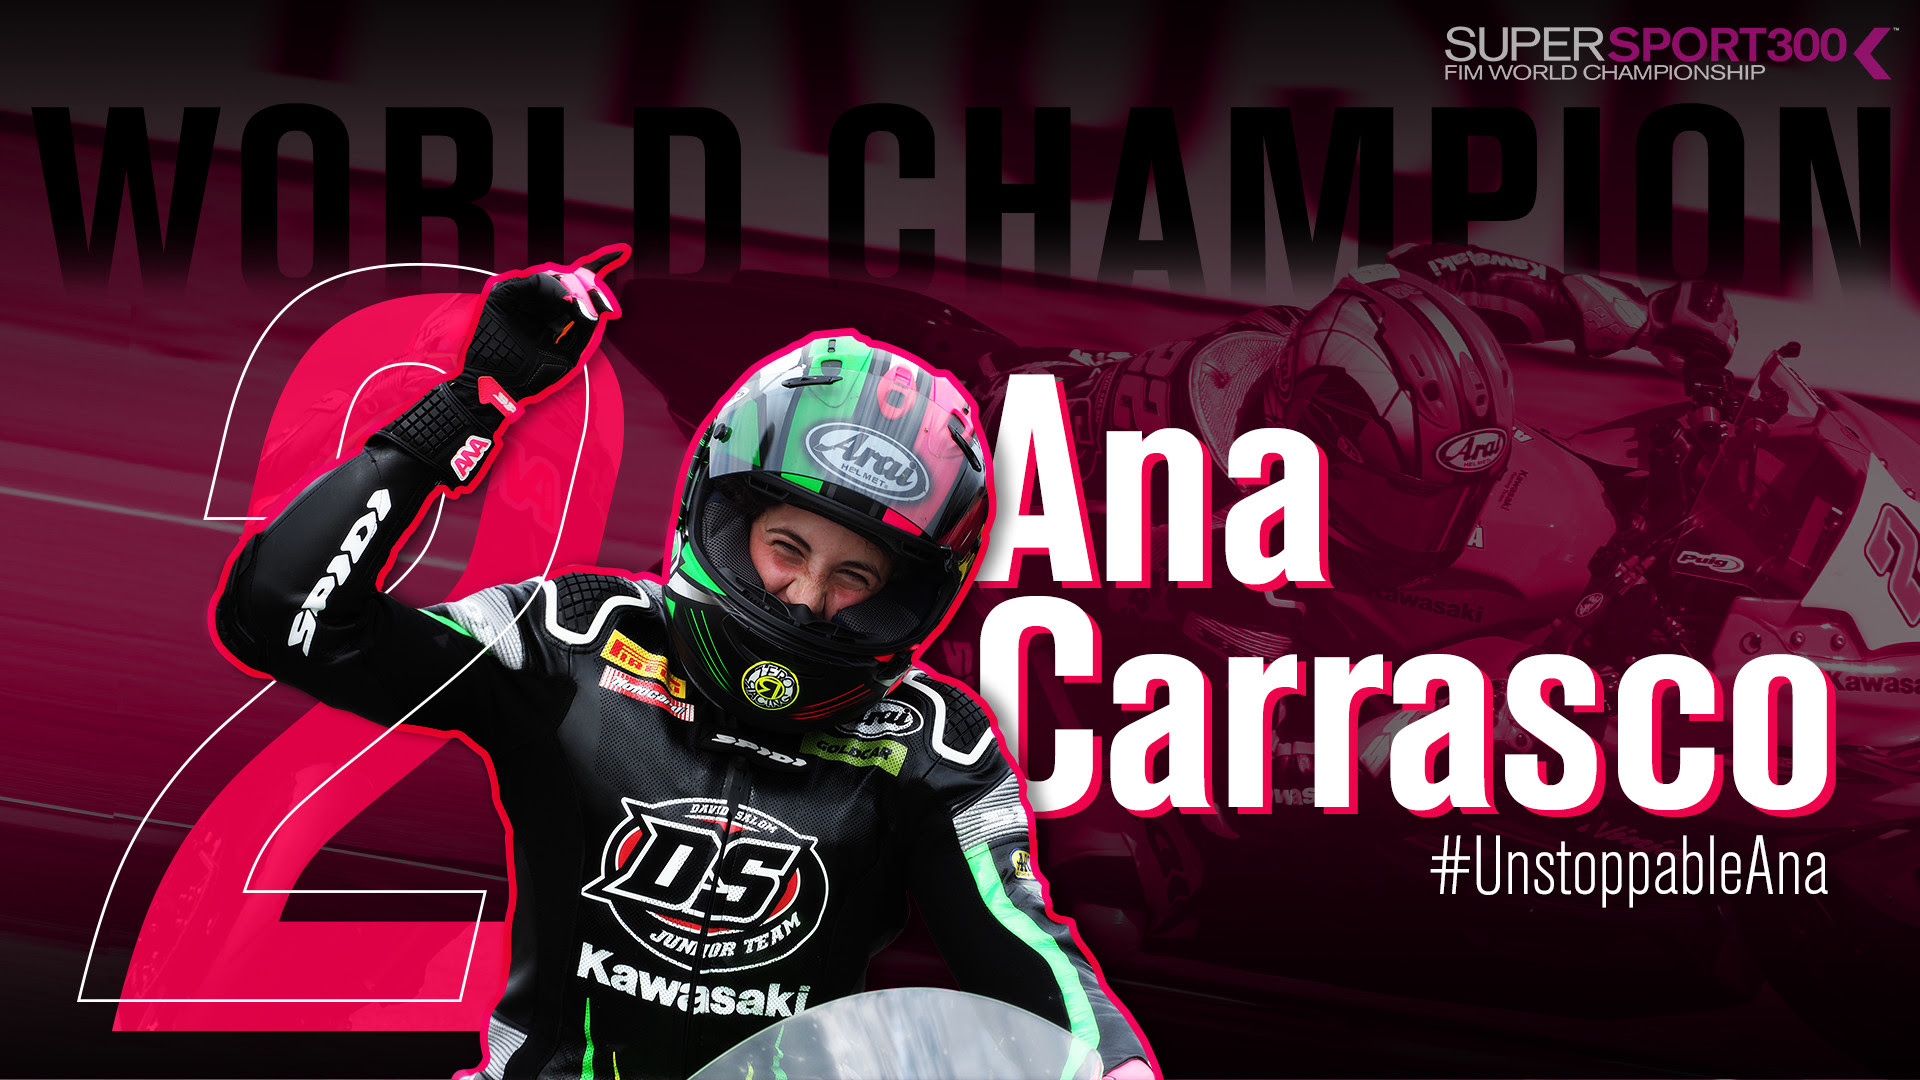 Photo of Carrasco wins WorldSSP300 title to become first female world champion